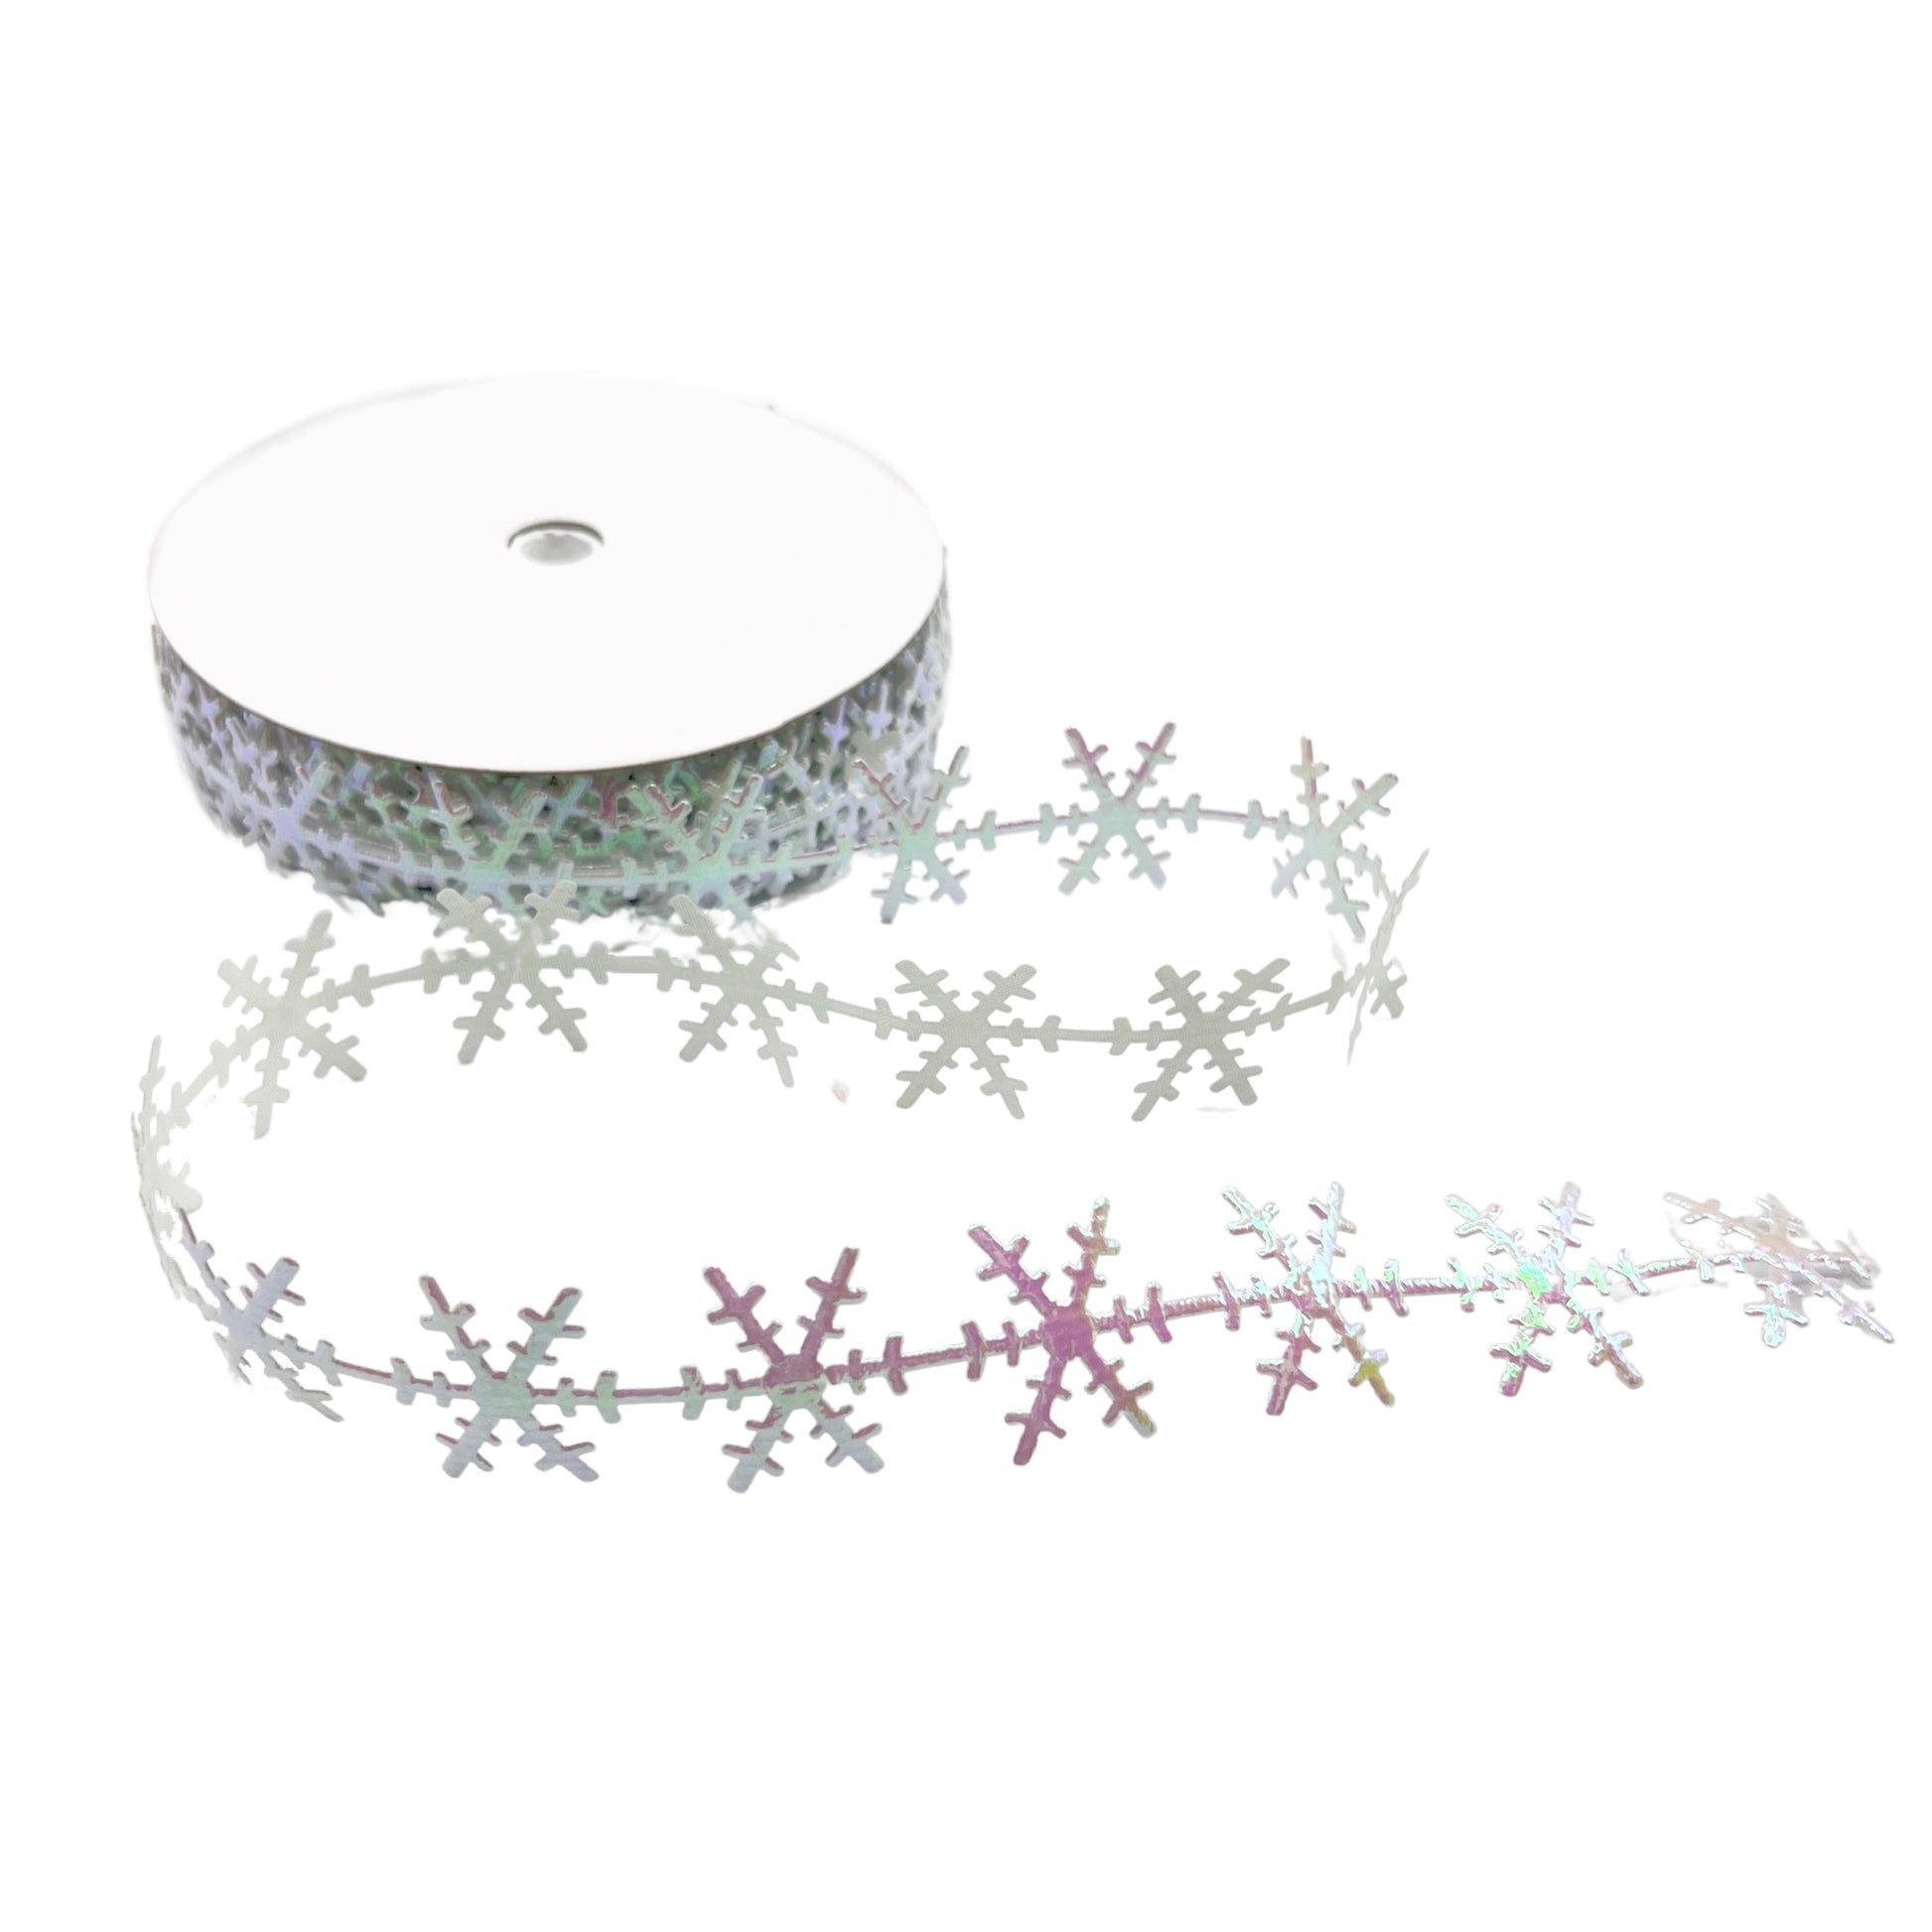 Snowflake trim with sparkles in white iridescent